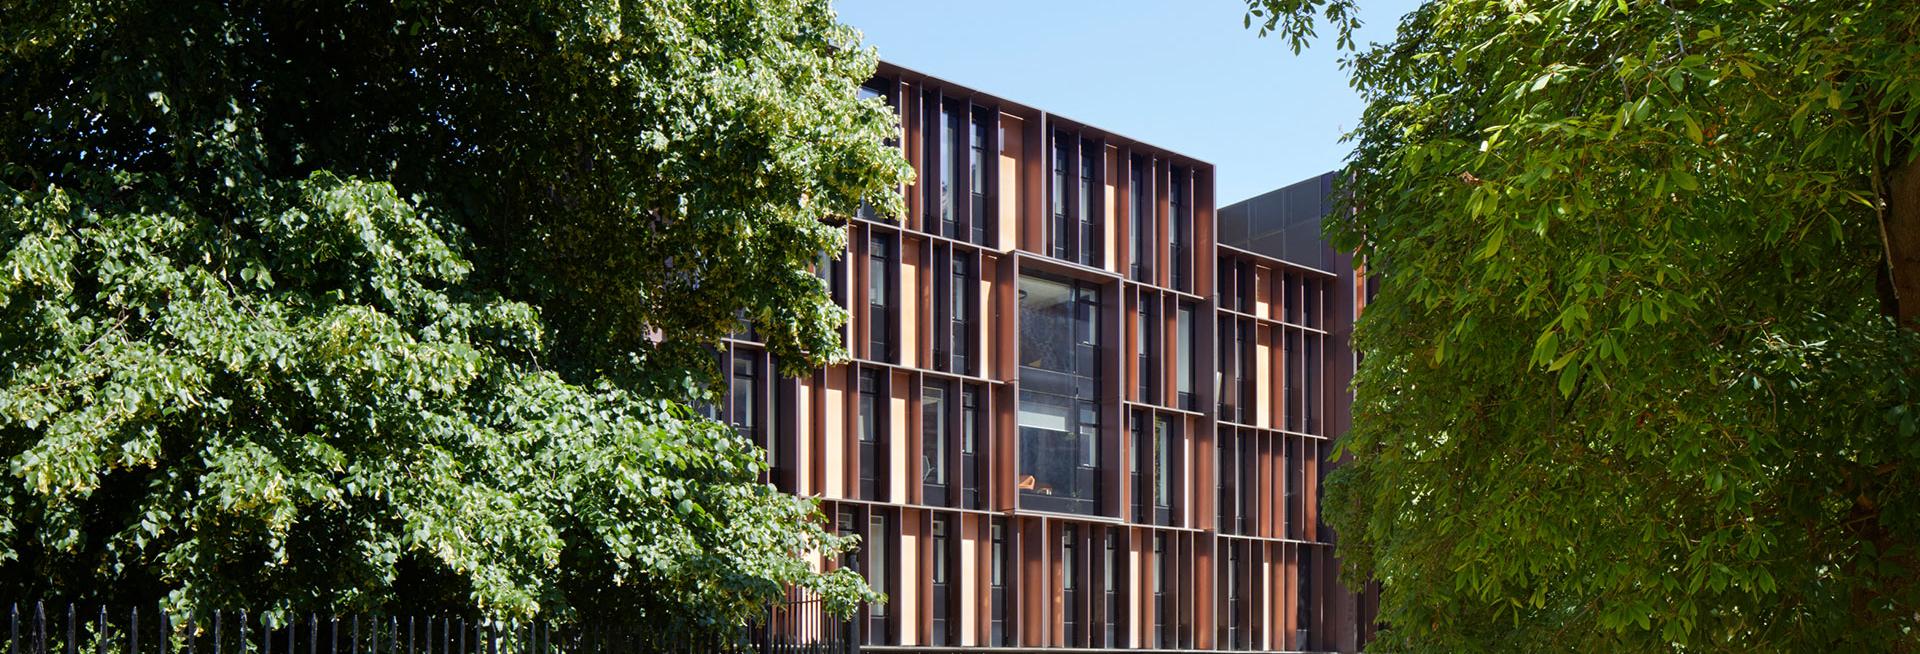 Beecroft building, Department of Physics, Oxford